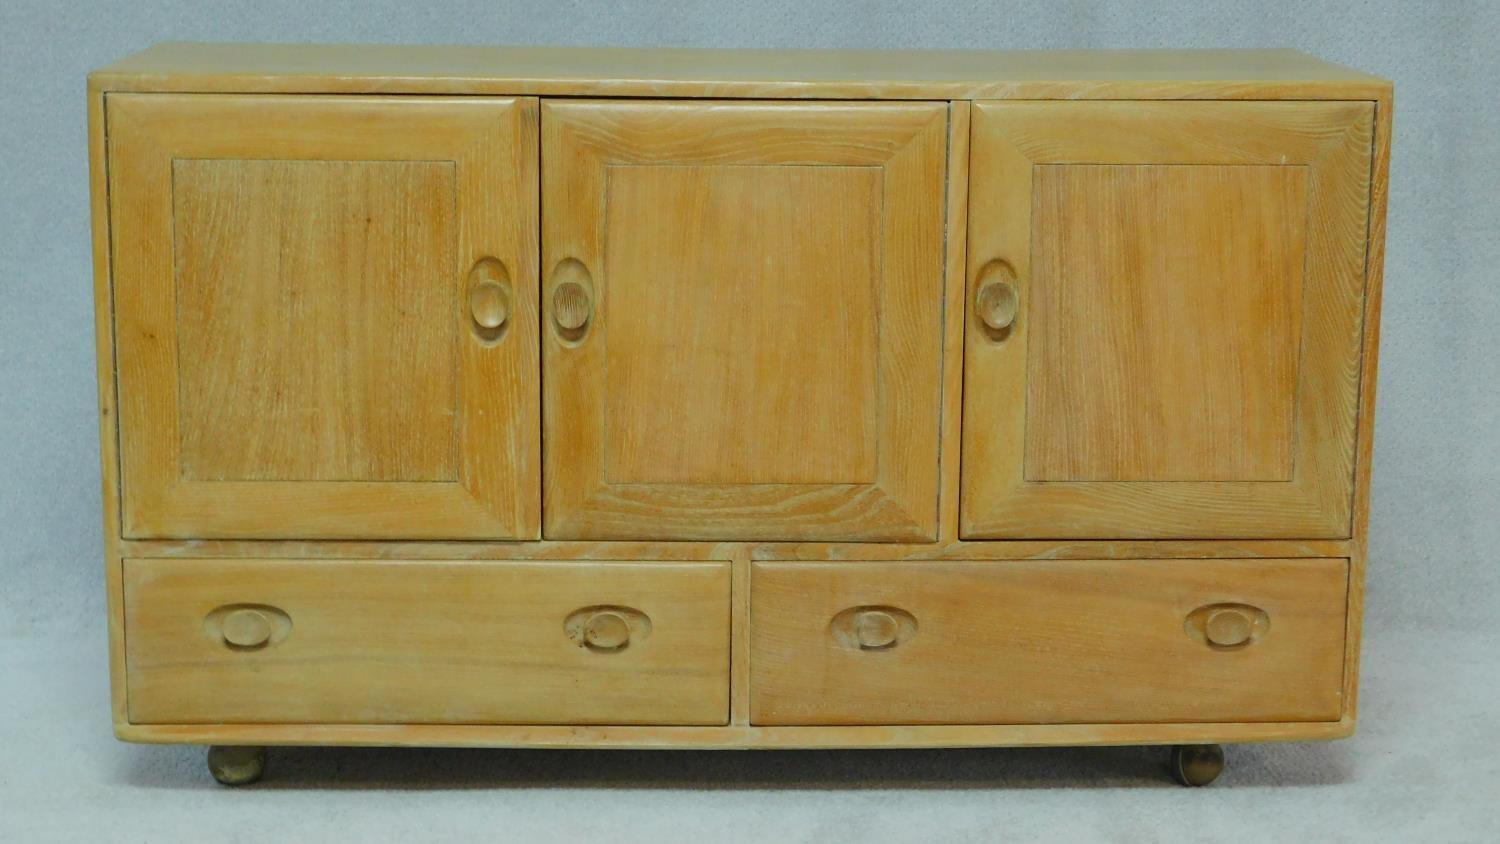 A vintage blonde elm Ercol sideboard, model 468, with an arrangement of drawers and cupboards raised